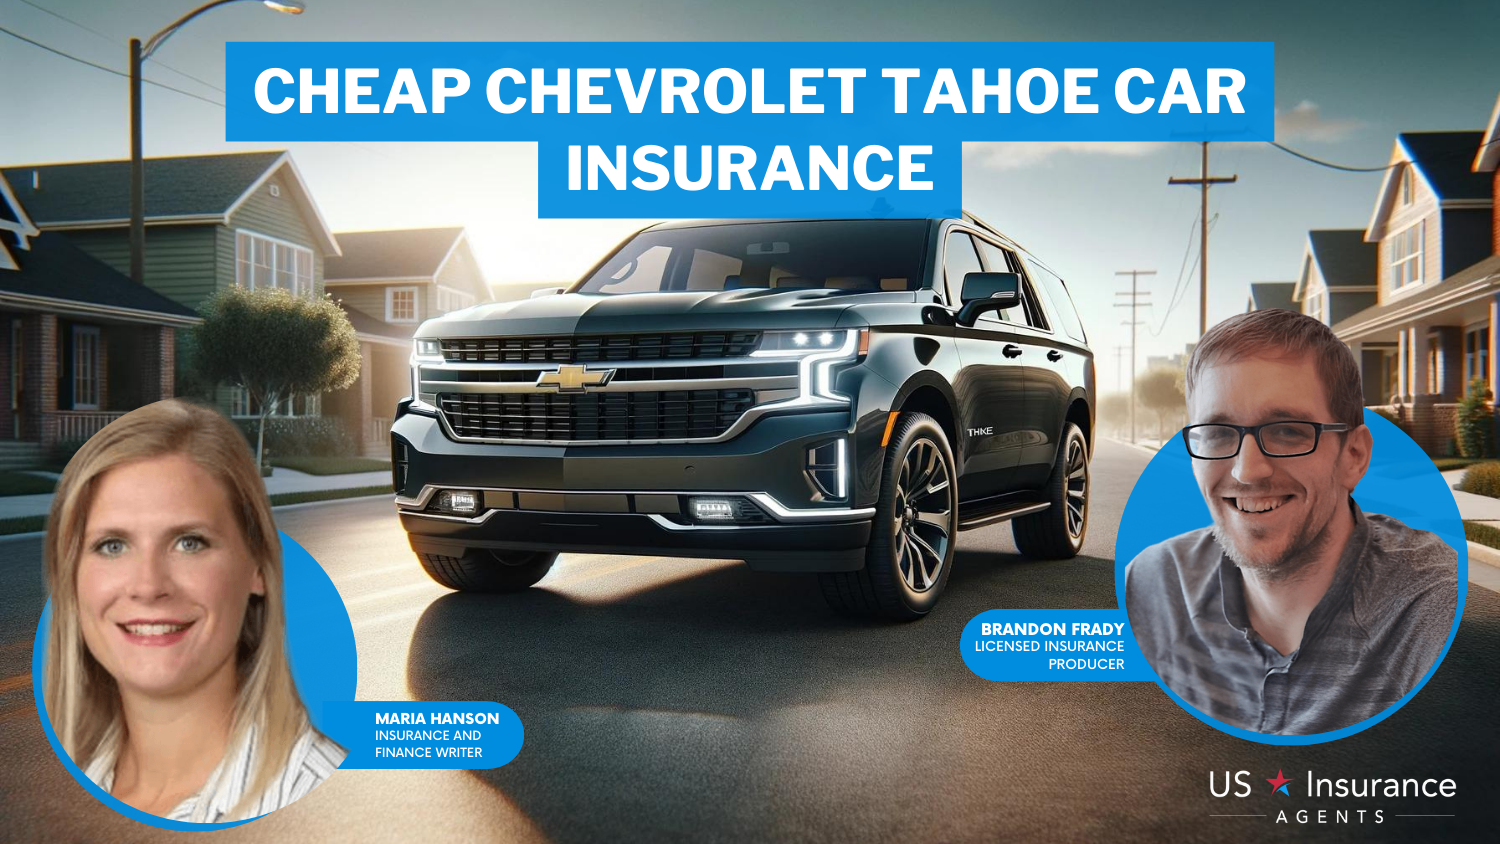 Cheap Chevrolet Tahoe Car Insurance: USAA, Erie, and Auto-Owners